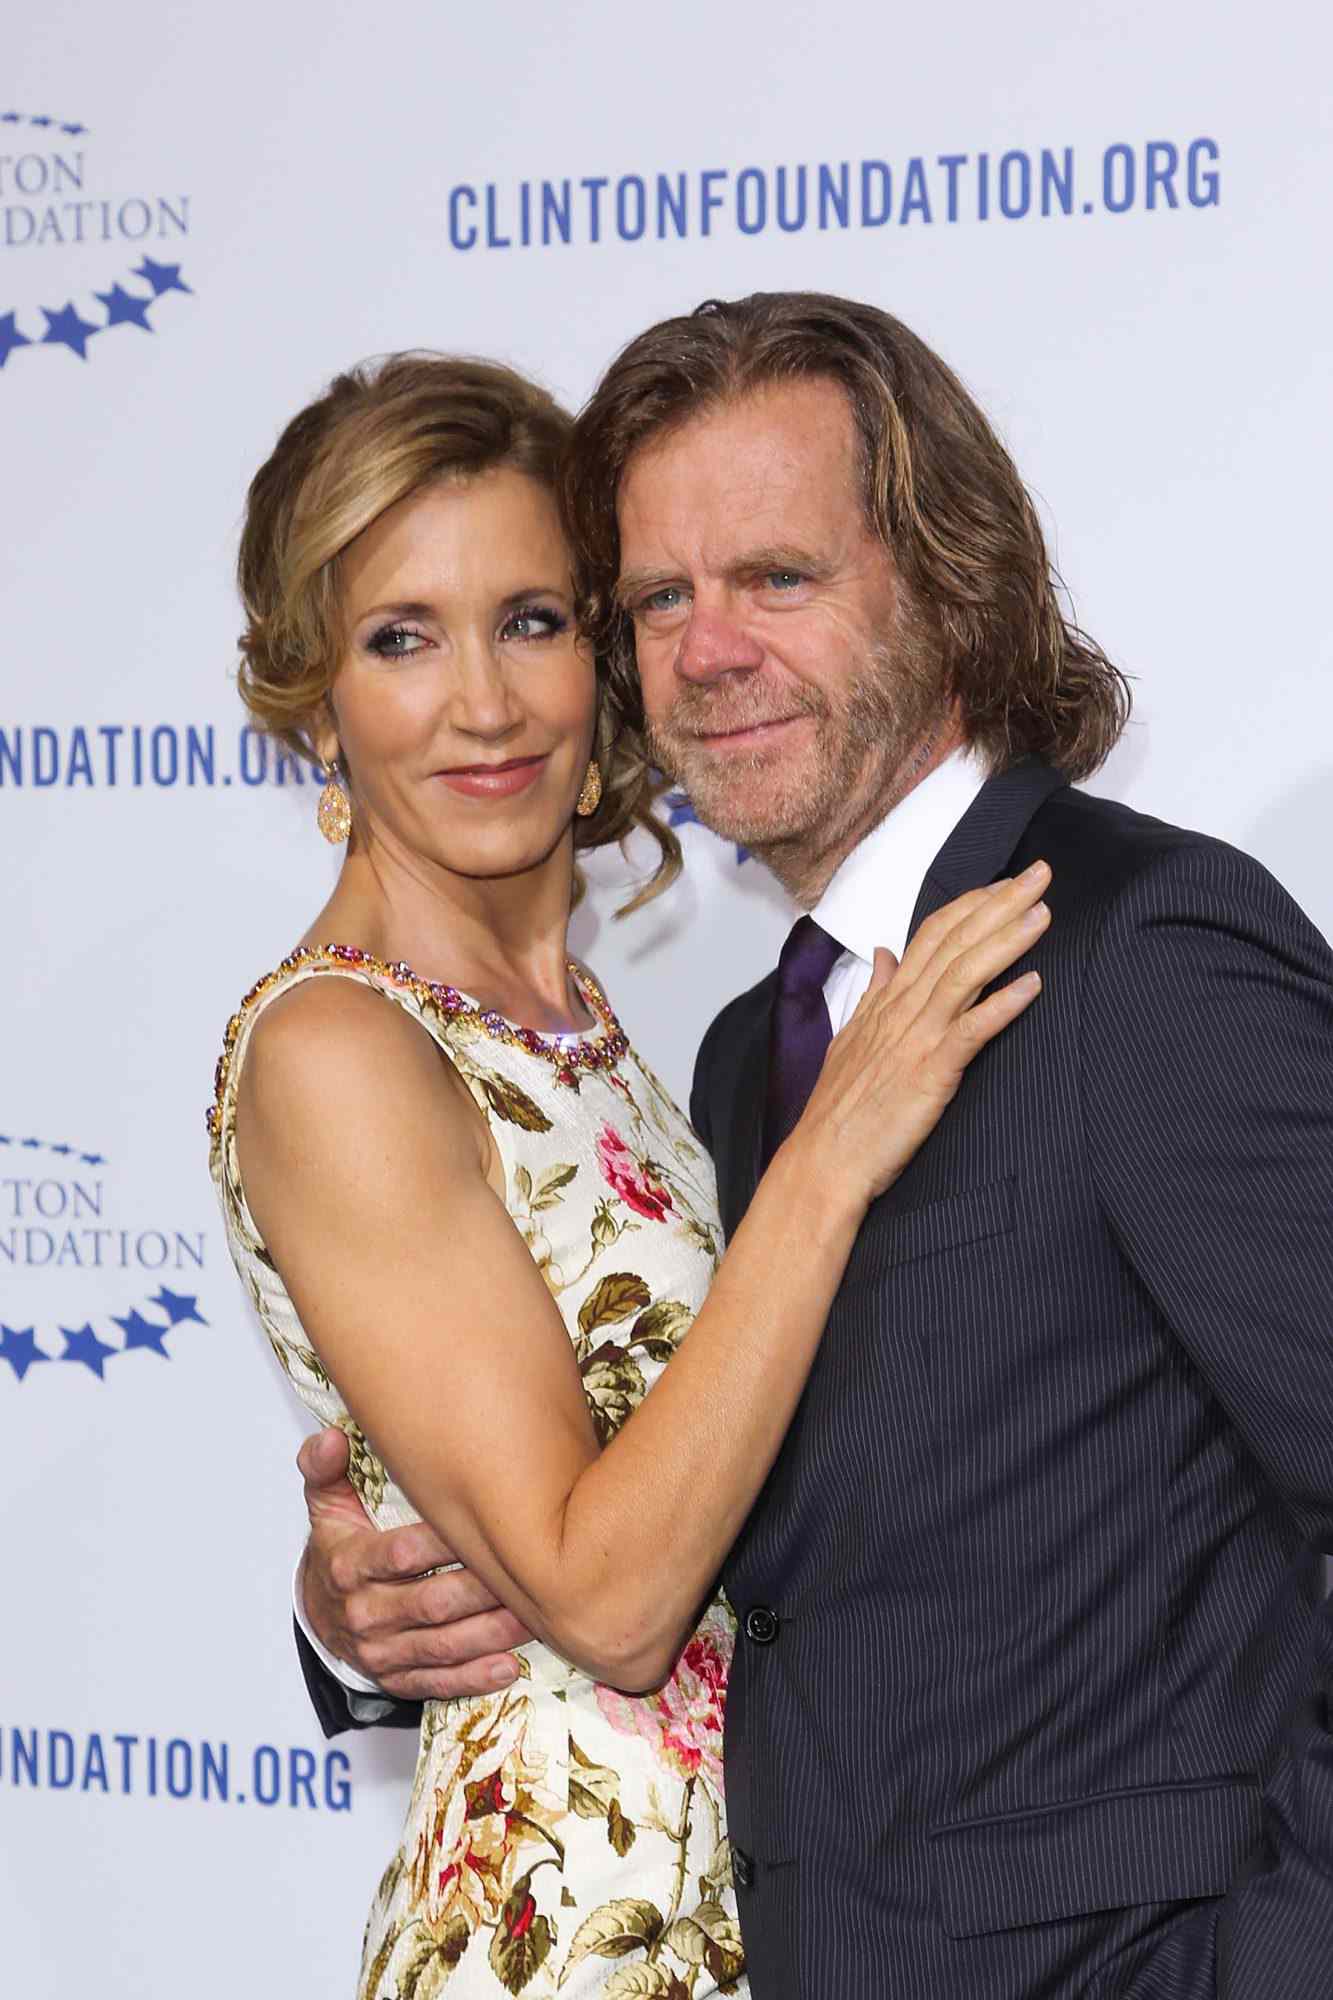 Felicity Huffman and William H. Macy at the Clinton Foundation's A Decade Of Difference Gala in Los Angeles on October 14, 2011